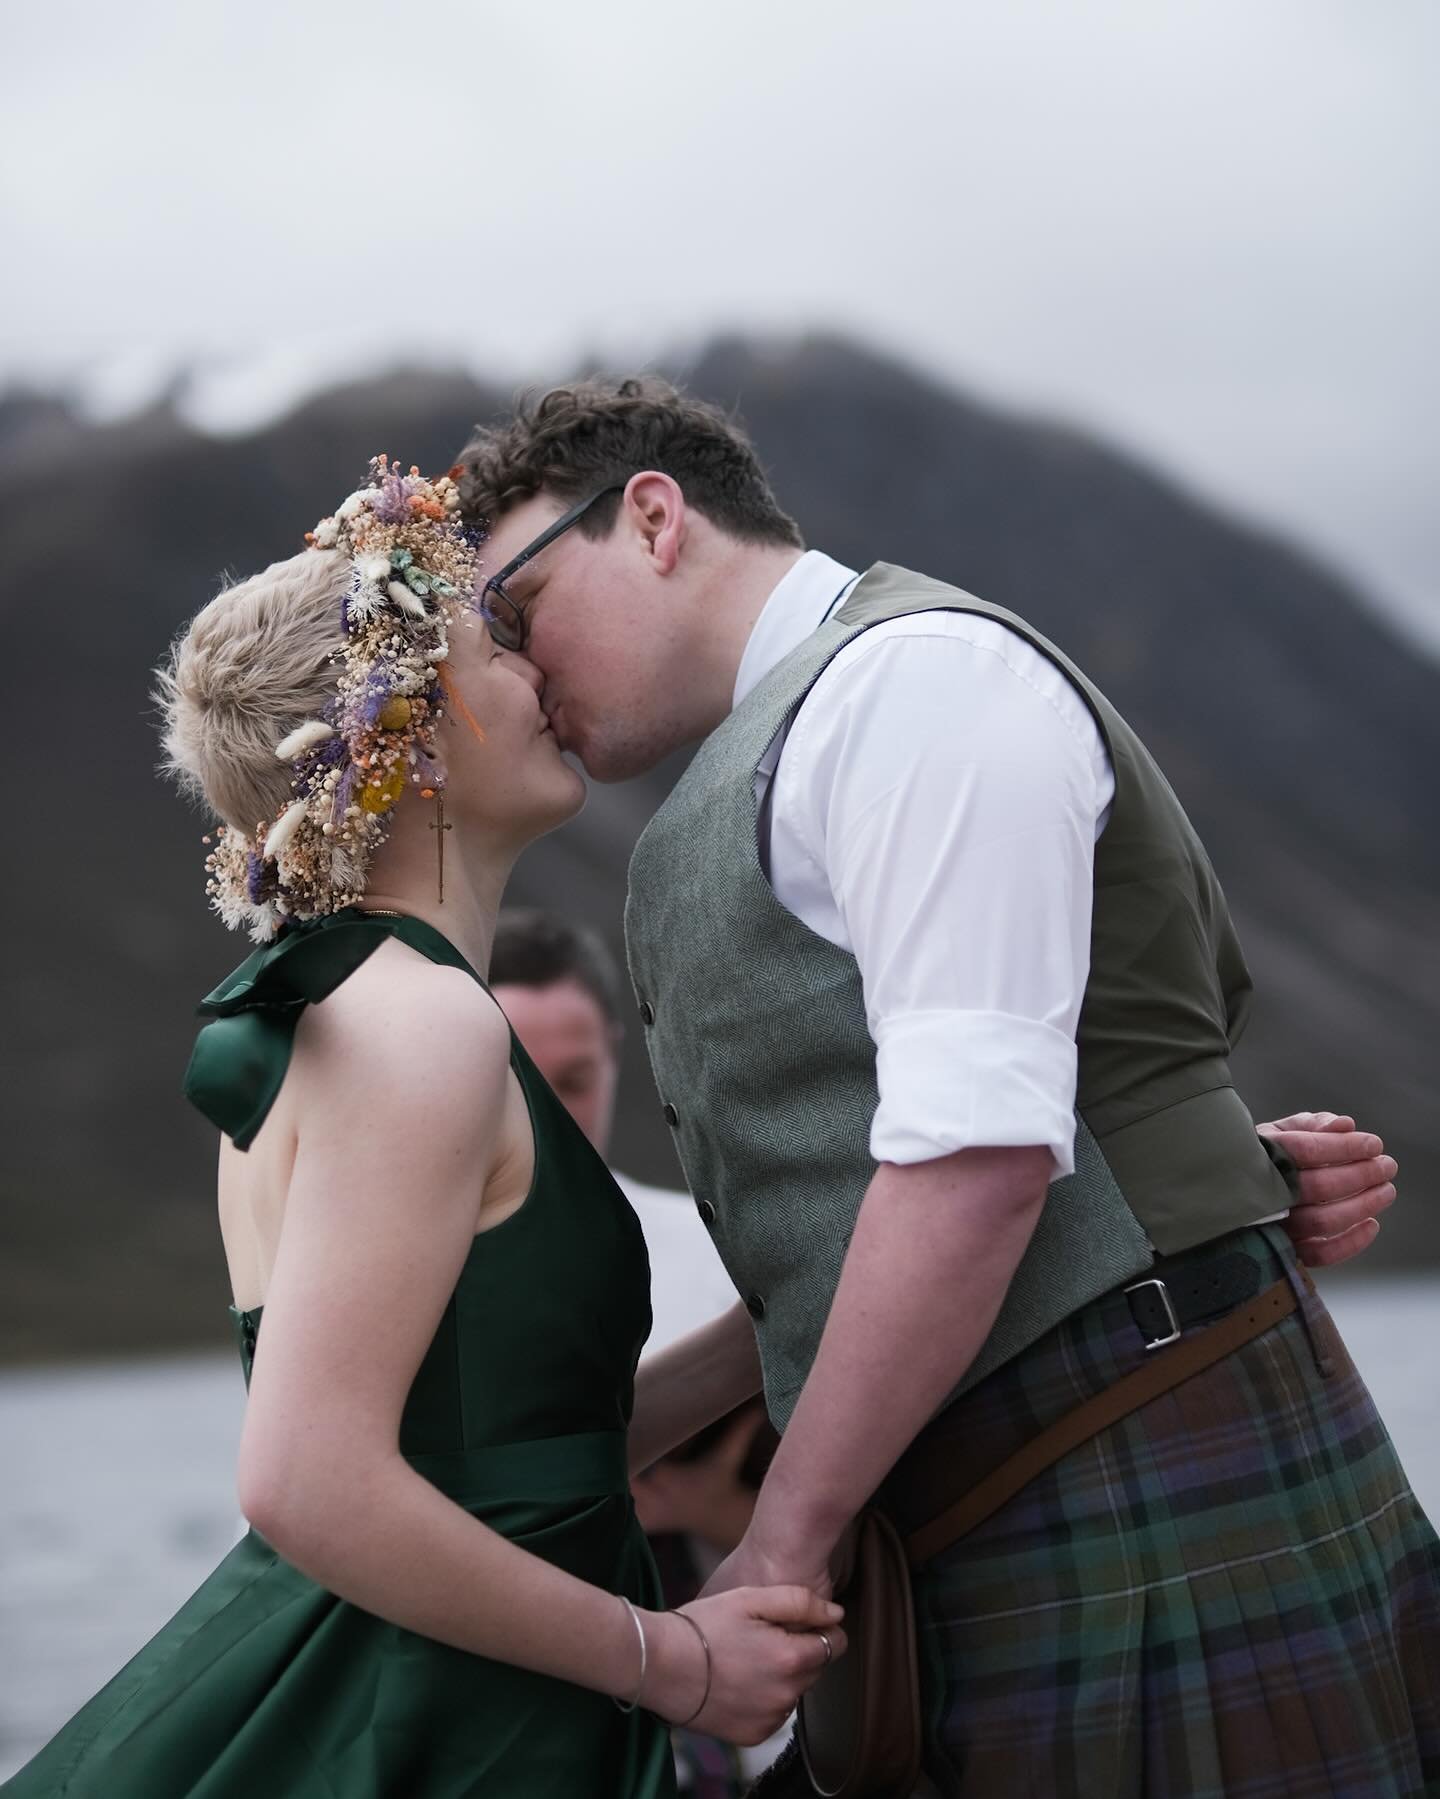 🤍 John &amp; Emily 🤍

Congratulations on your first wedding anniversary. You cycled a long way to marry at beautiful Loch Einich in the Cairngorms, a remote and romantic location surrounded by the mountains. Enjoy celebrating on this special day! ?